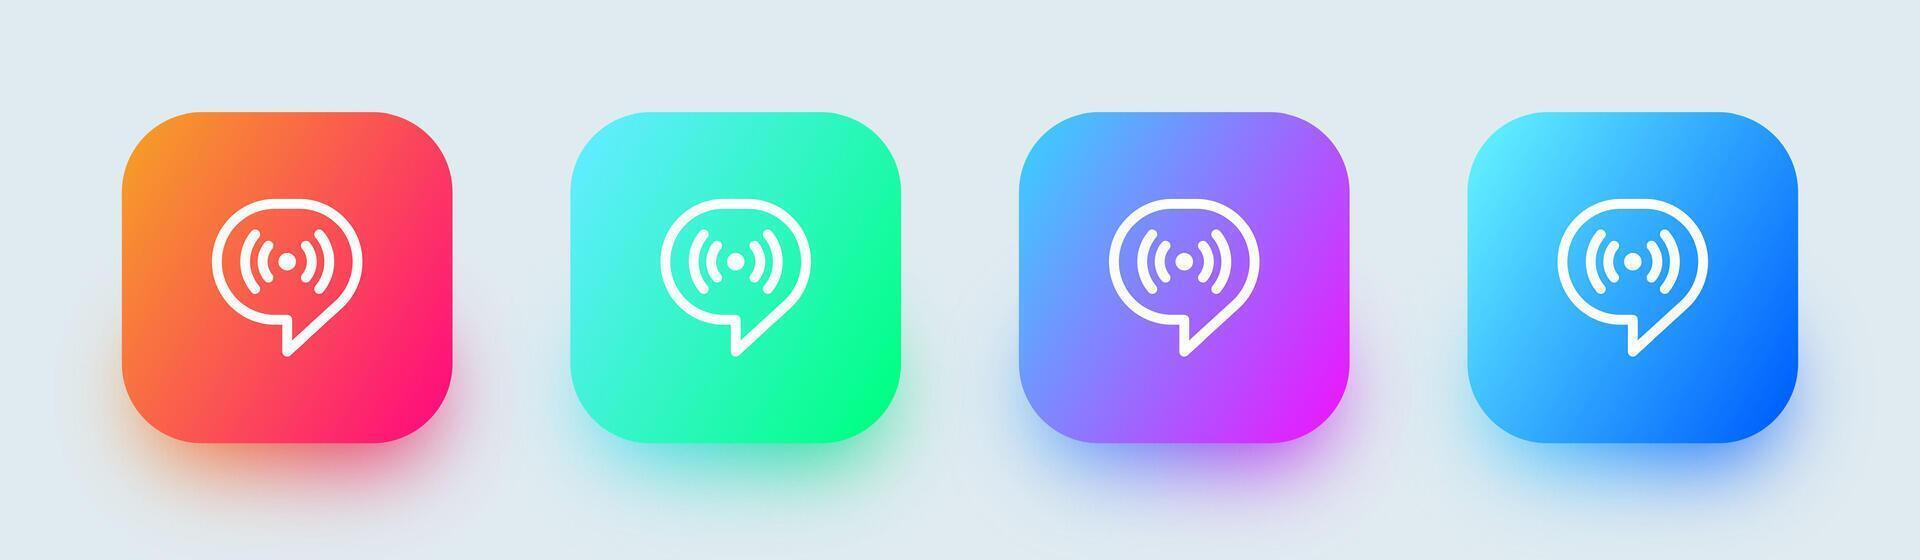 Broadcast channel line icon in square gradient colors. Chat group signs vector illustration.